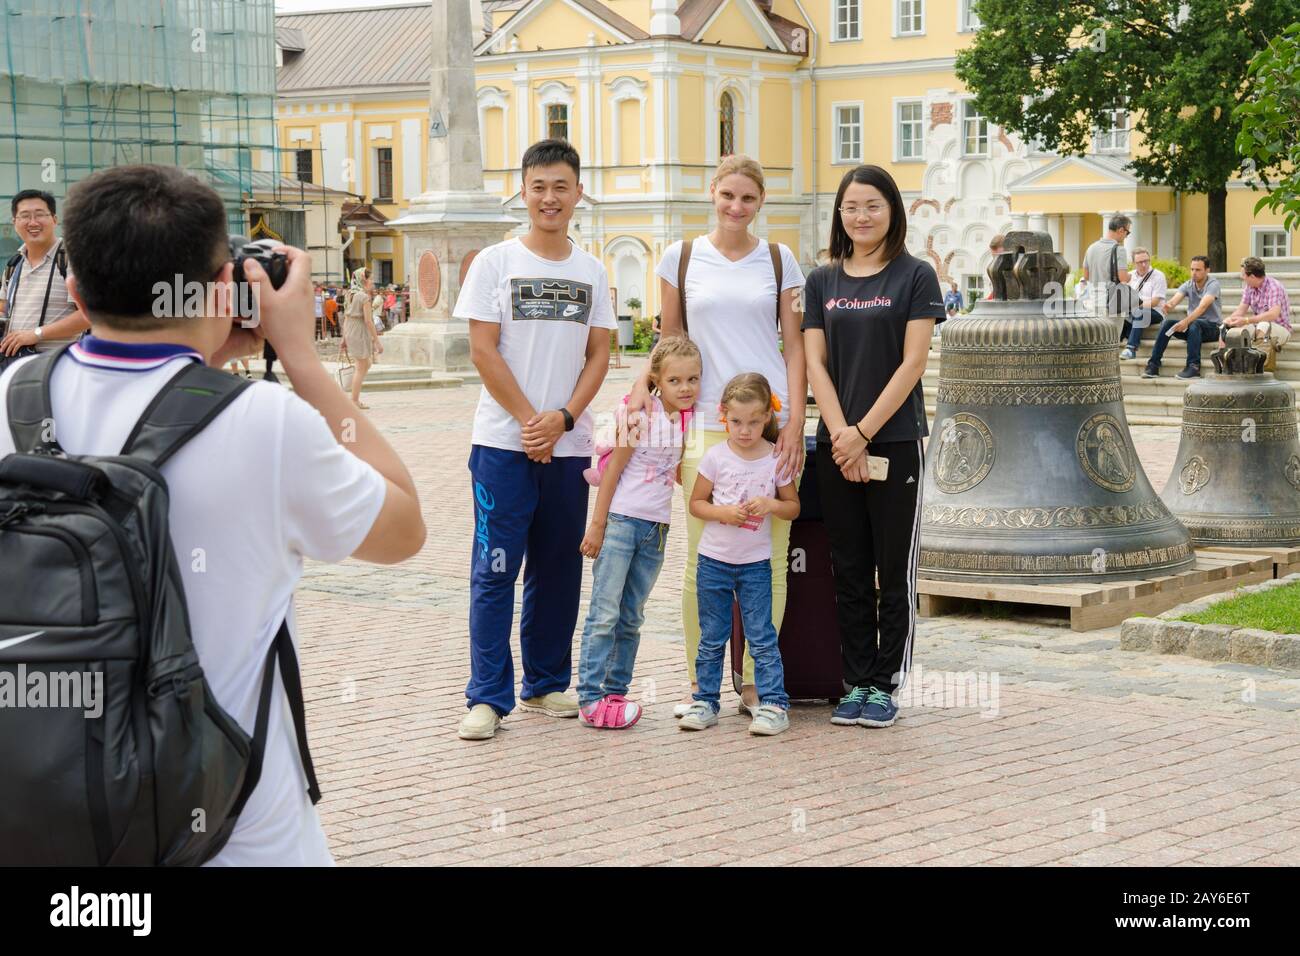 Sergiev Posad - August 10, 2015: Foreign tourists are photographed with Russian visitors on the background of the bells in the H Stock Photo